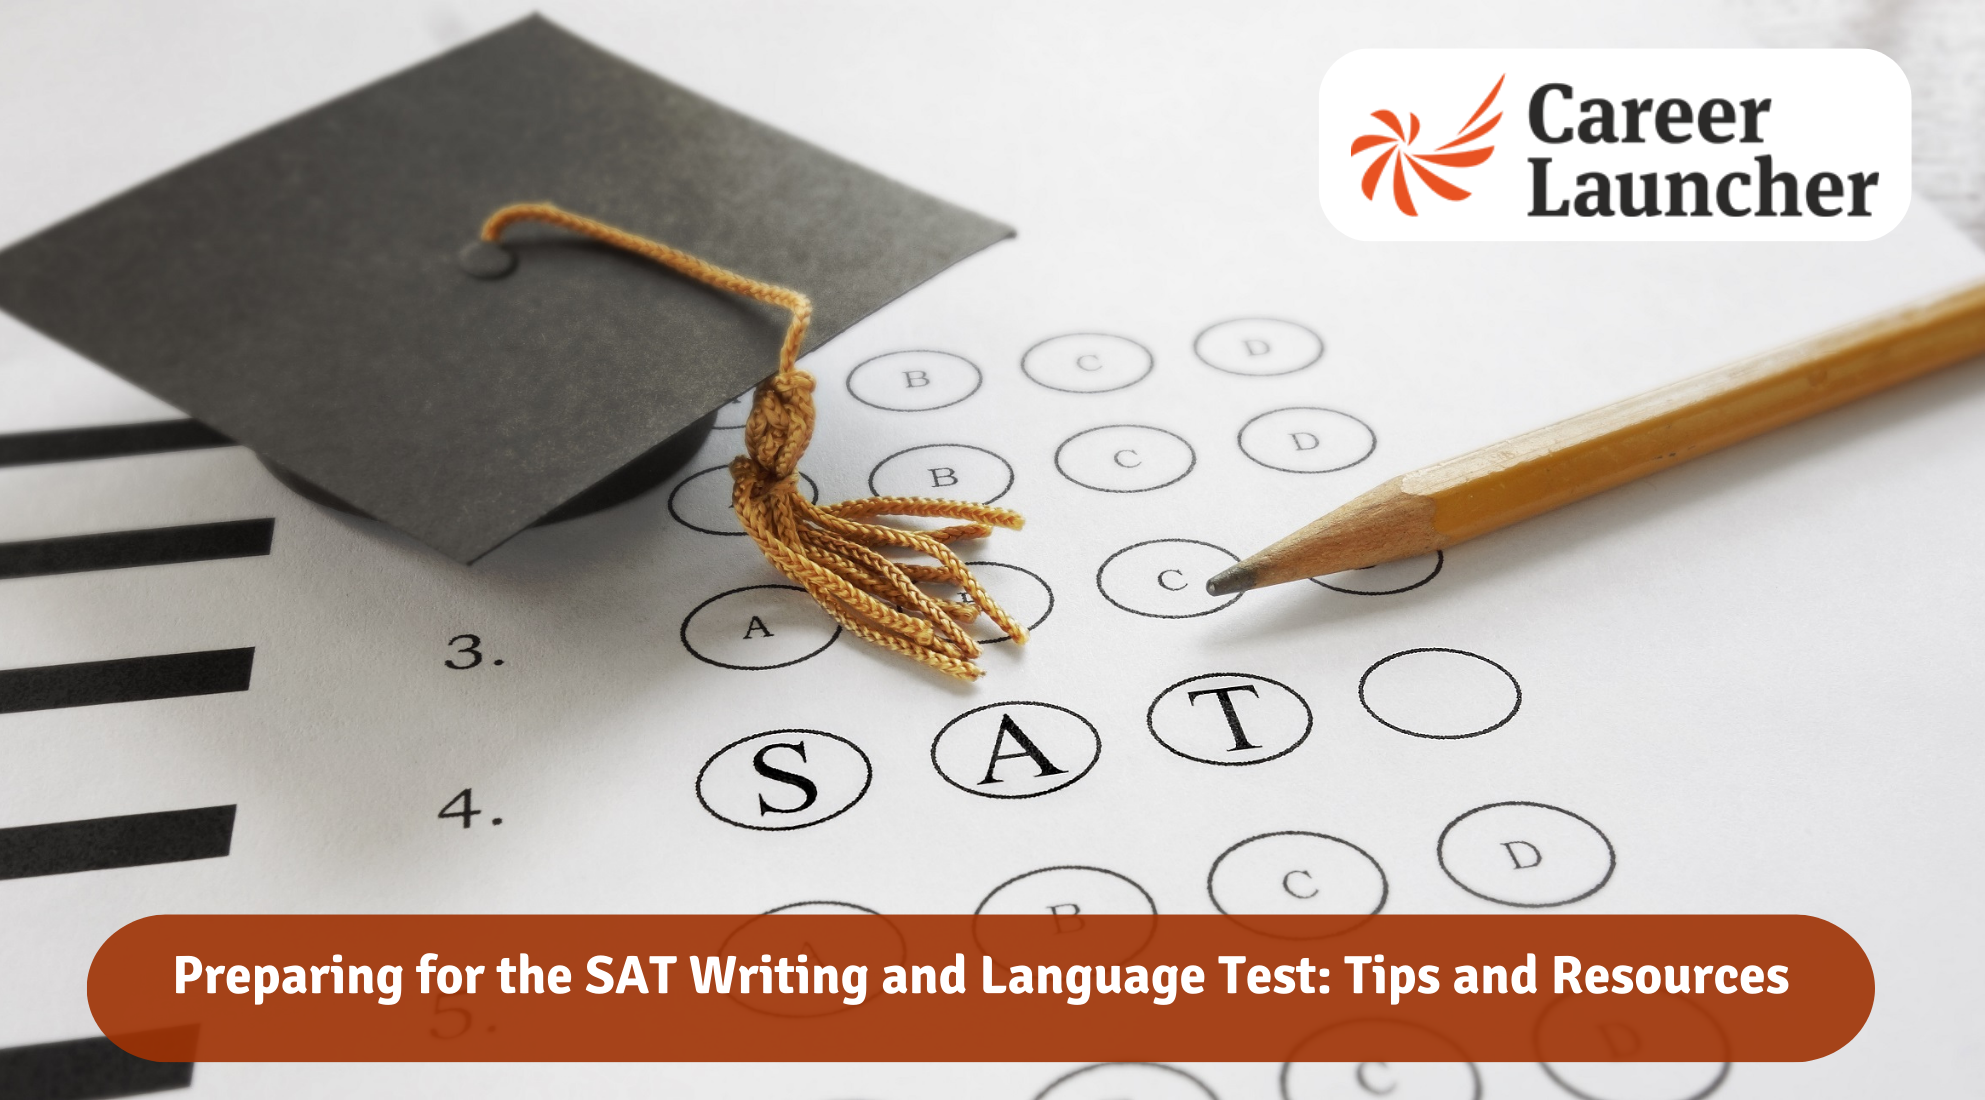 Preparing for the SAT Writing and Language Test: Tips and Resources